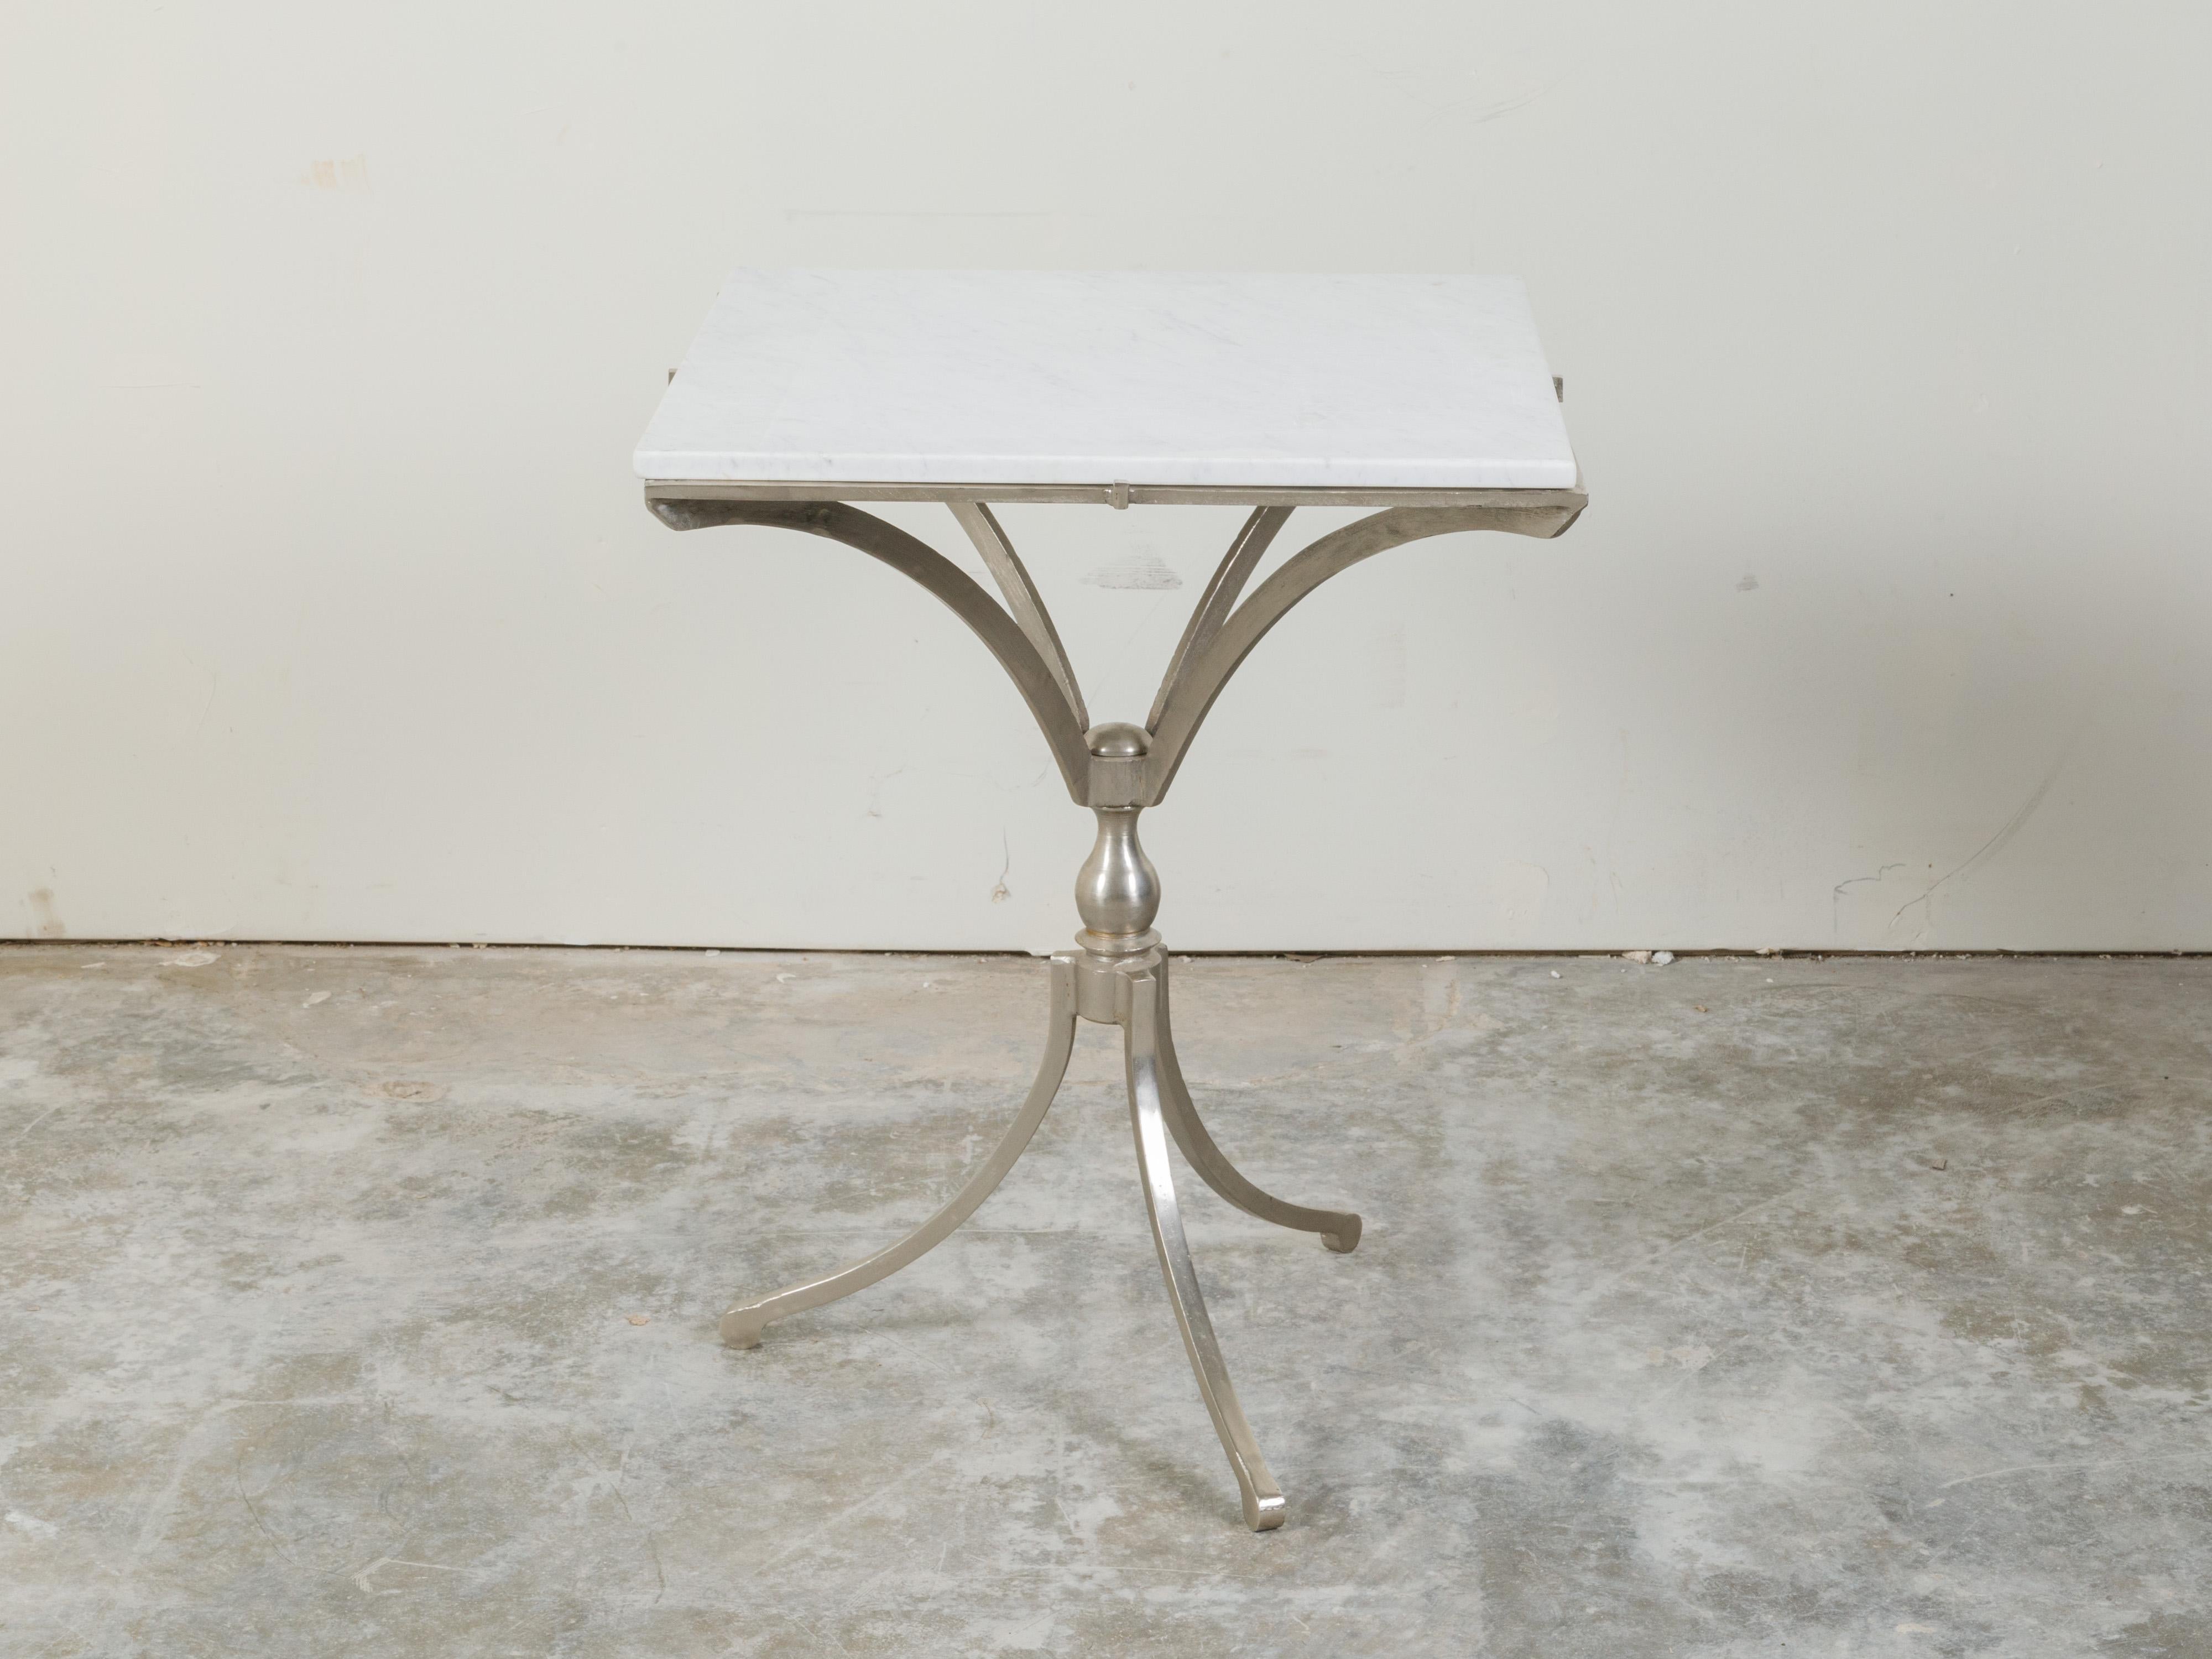 An Italian steel table from the mid 20th century, with white marble top and tripod base. Created in Italy during the midcentury period, this steel table features a square-shaped white marble top sitting above a steel structure with tripod base.